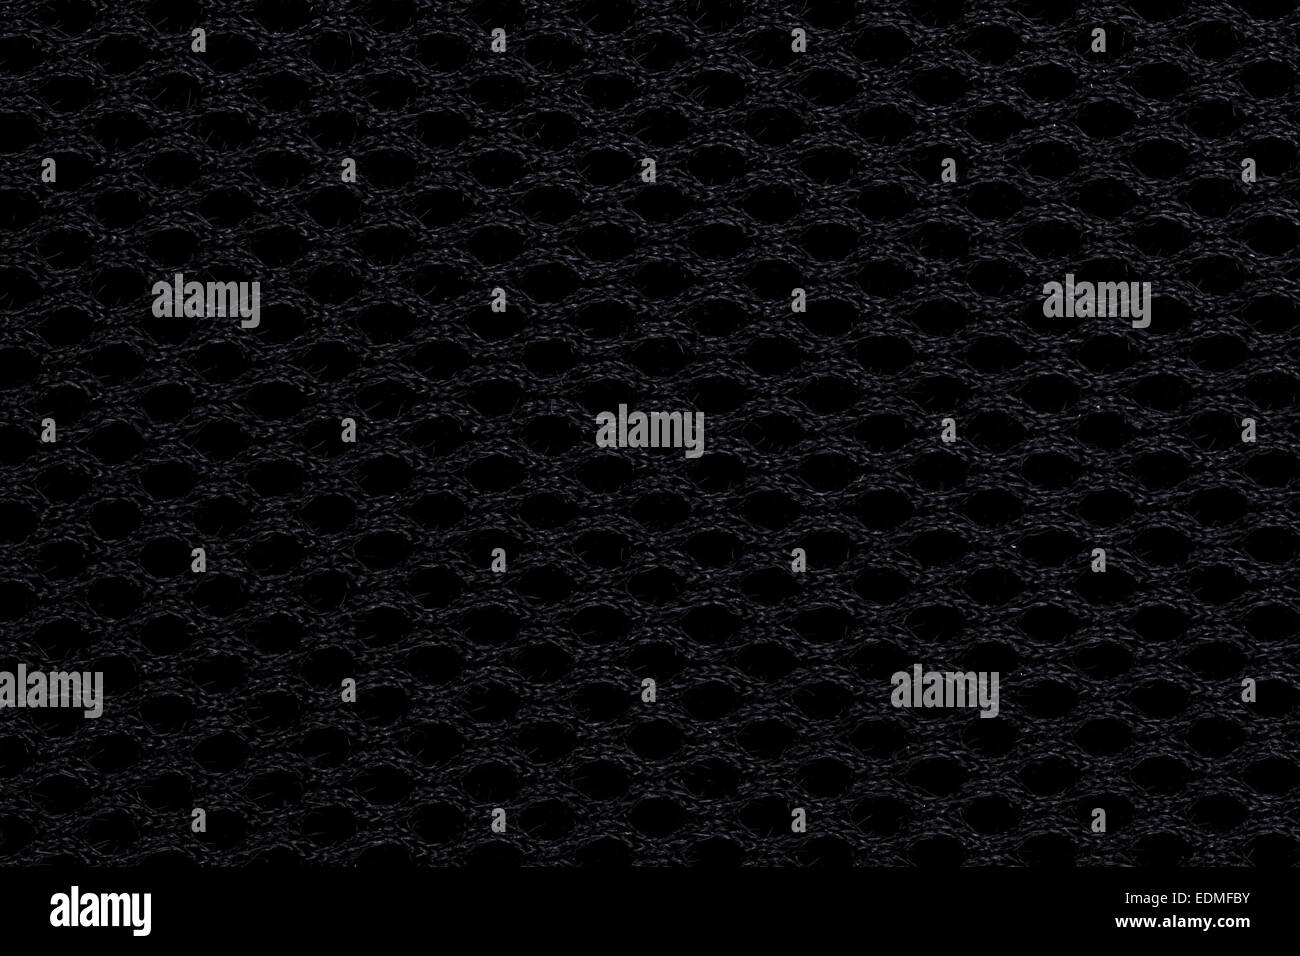 Black fabric with dots, a background or texture Stock Photo